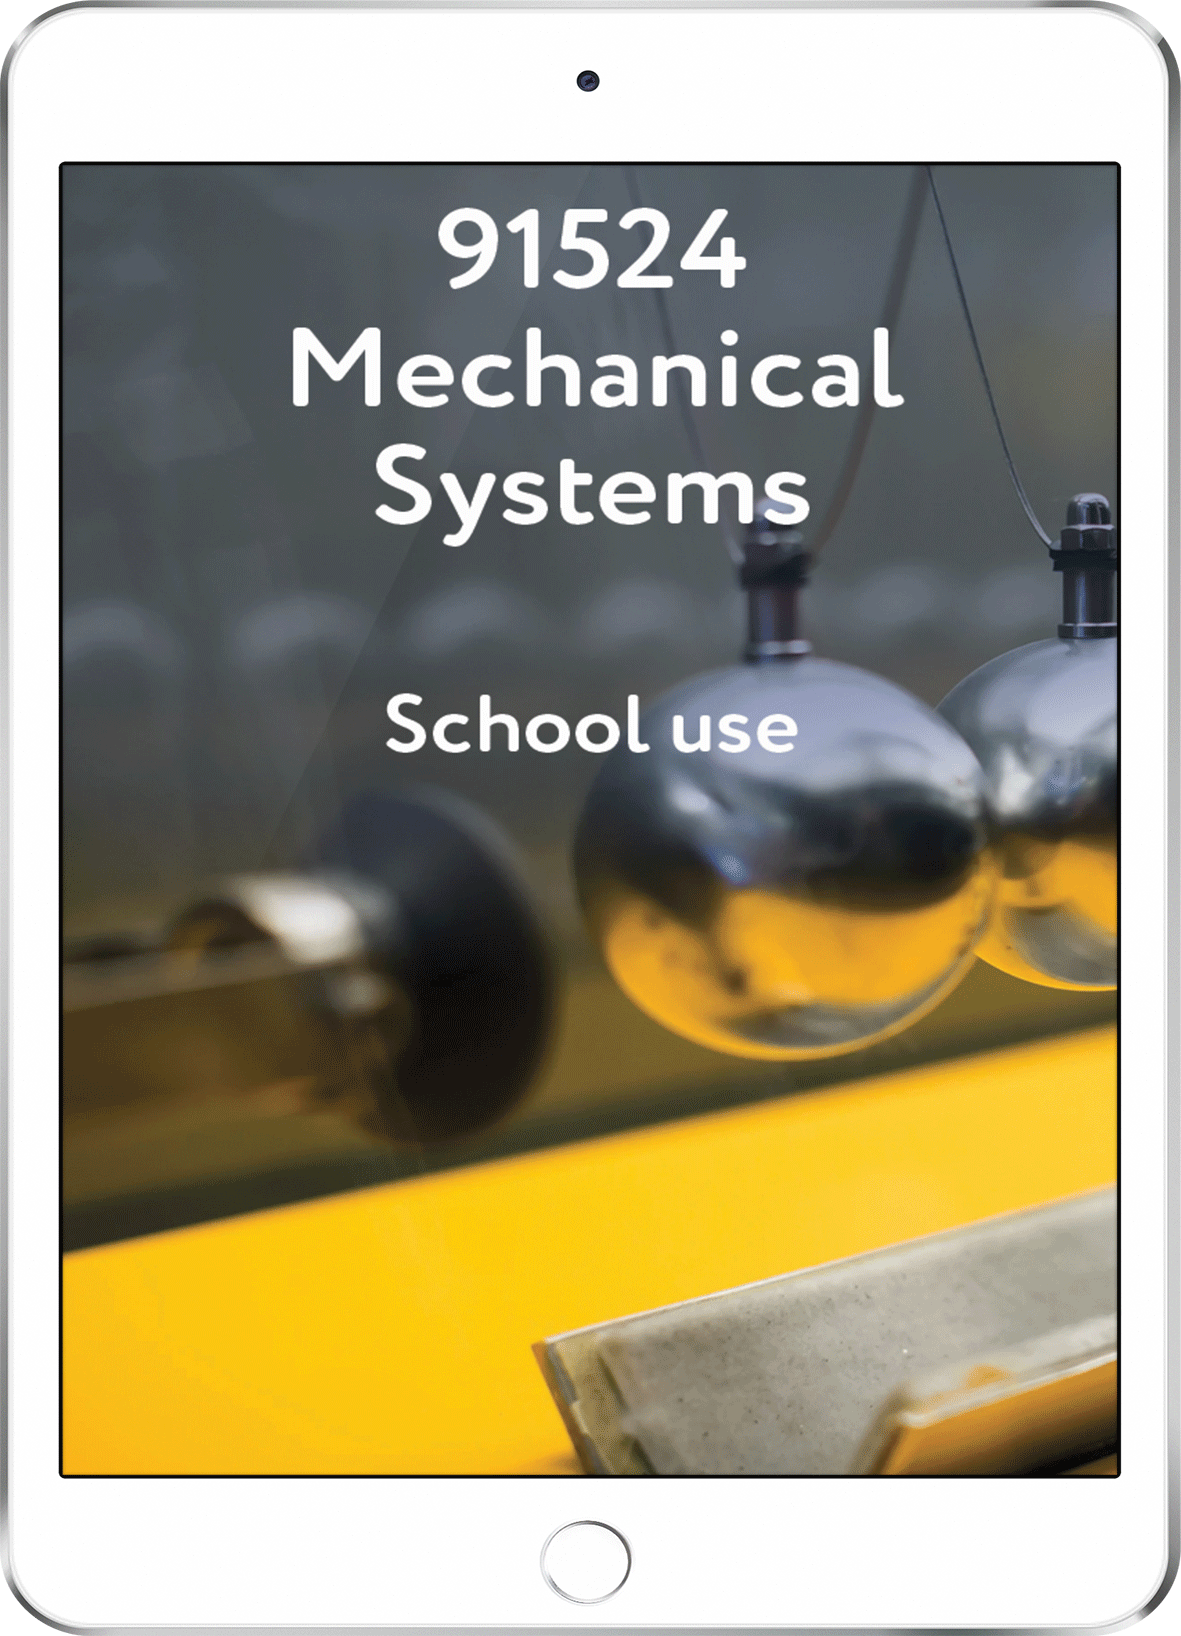 91524 Mechanical Systems - School Use